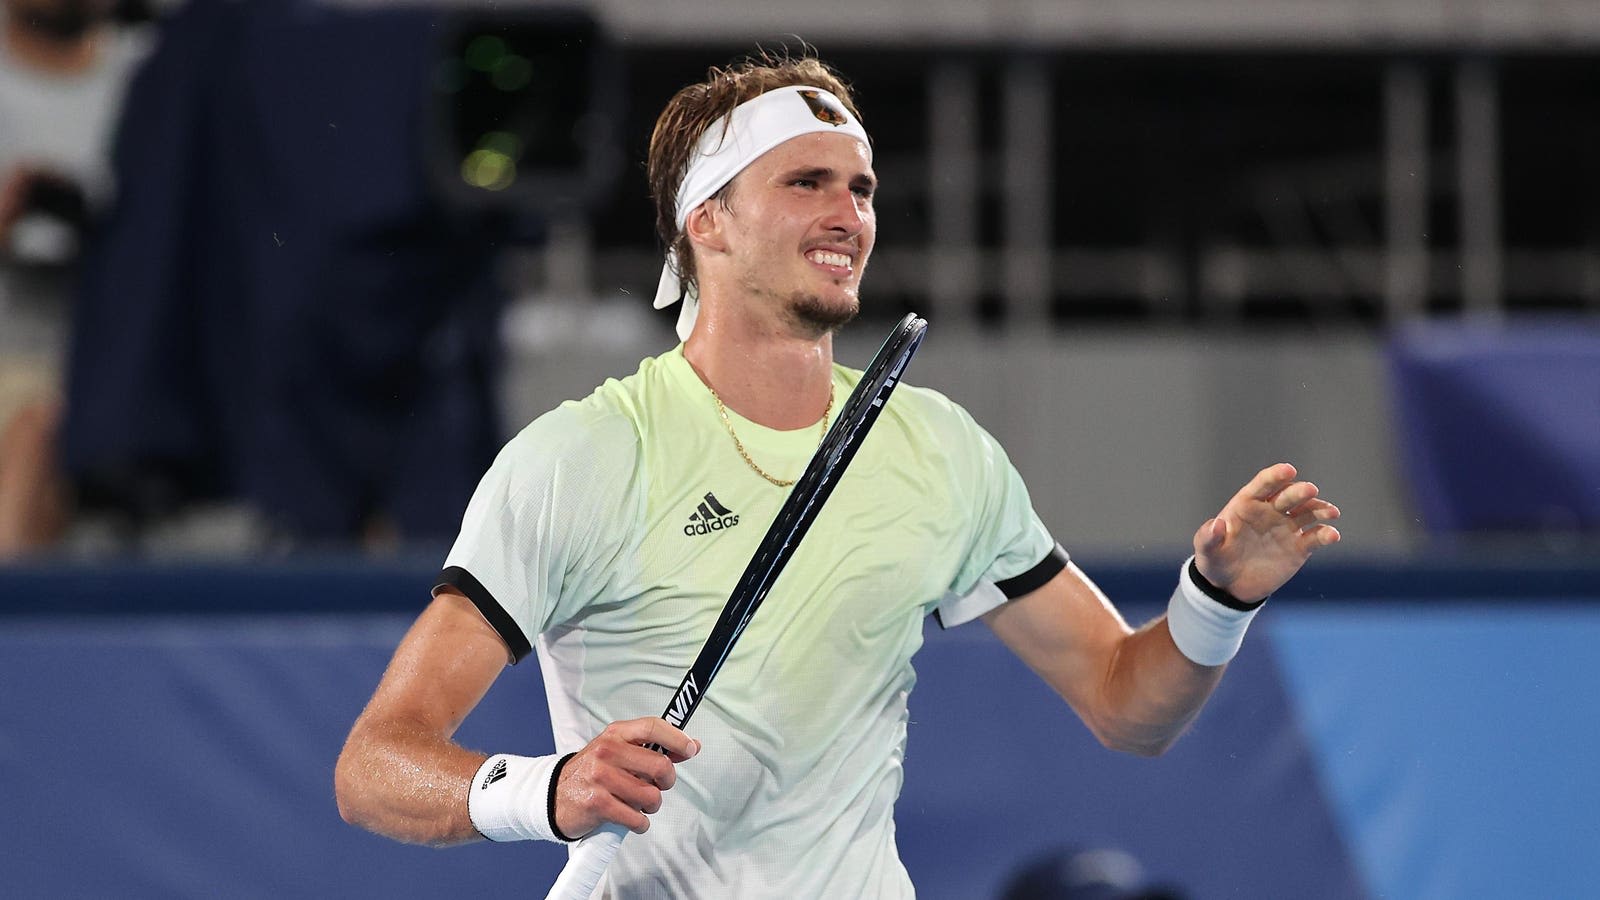 Alexander Zverev Assault Allegations: No. 4 Tennis Player’s Appeal Begins During French Open